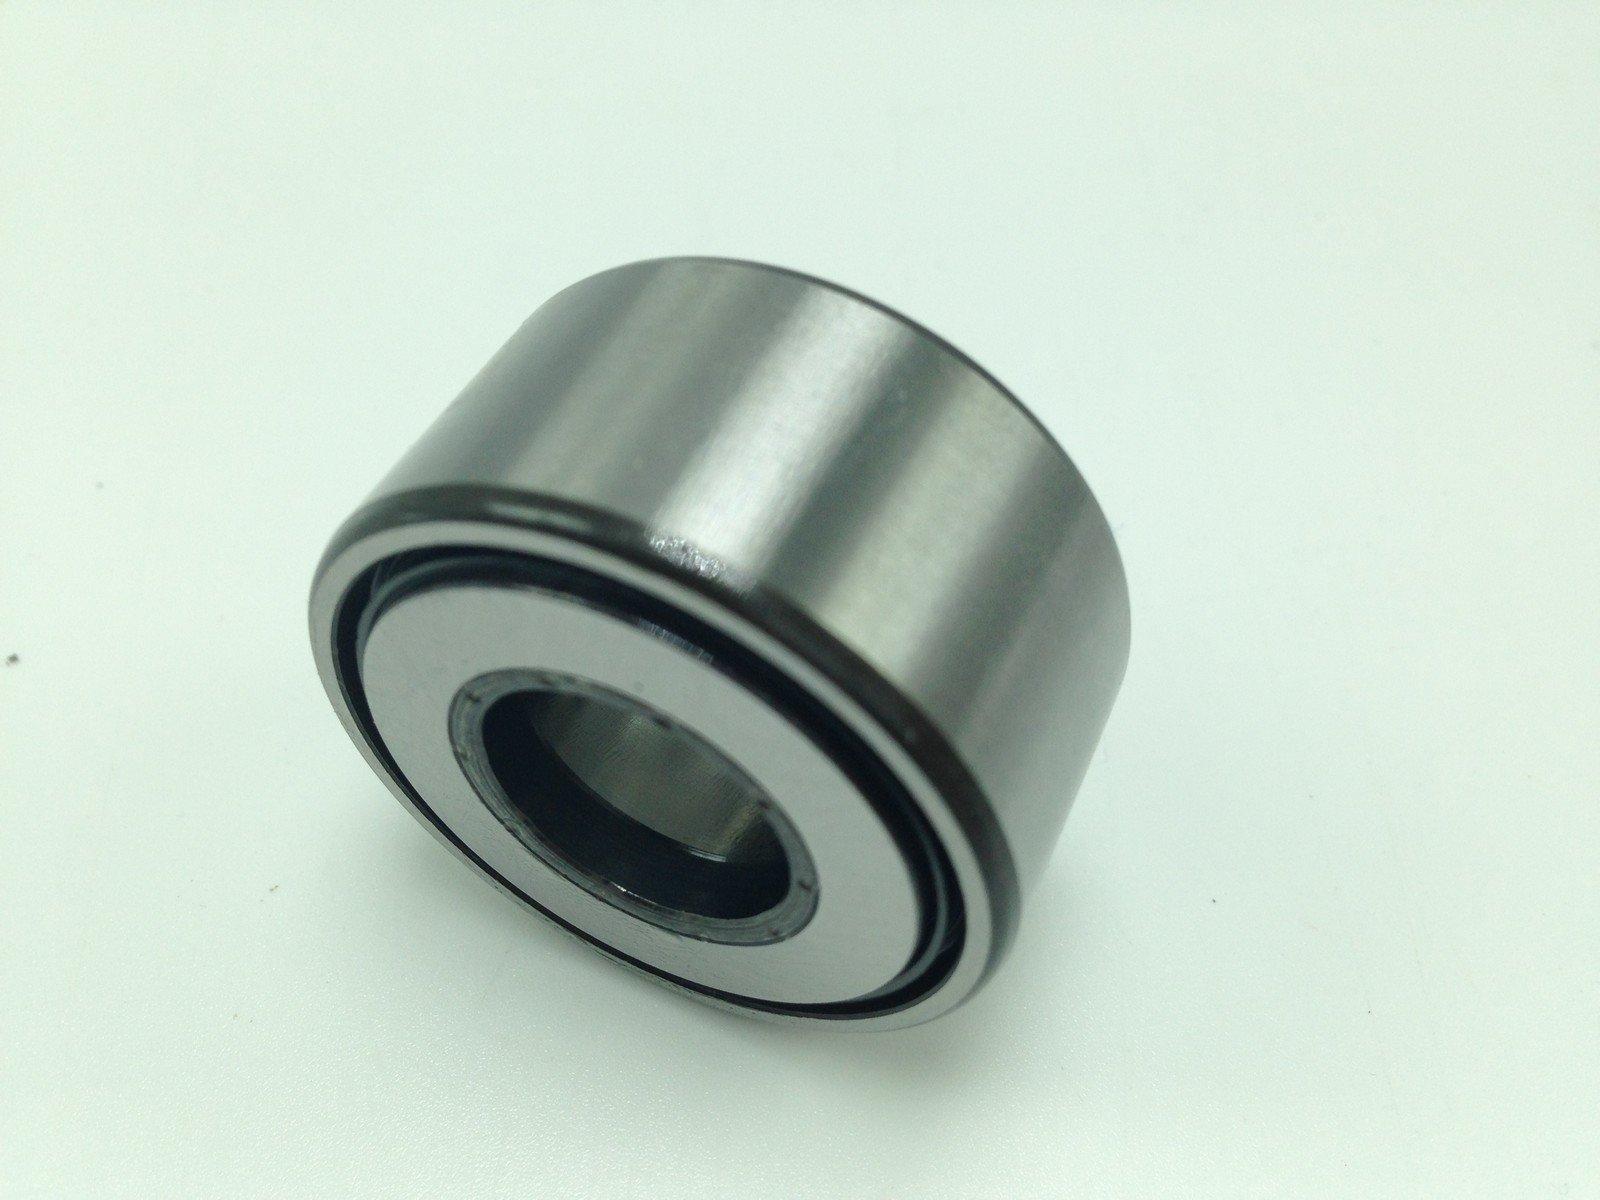 NEW INA NATR15-PP-A Roller BEARING 15 mm Bore 